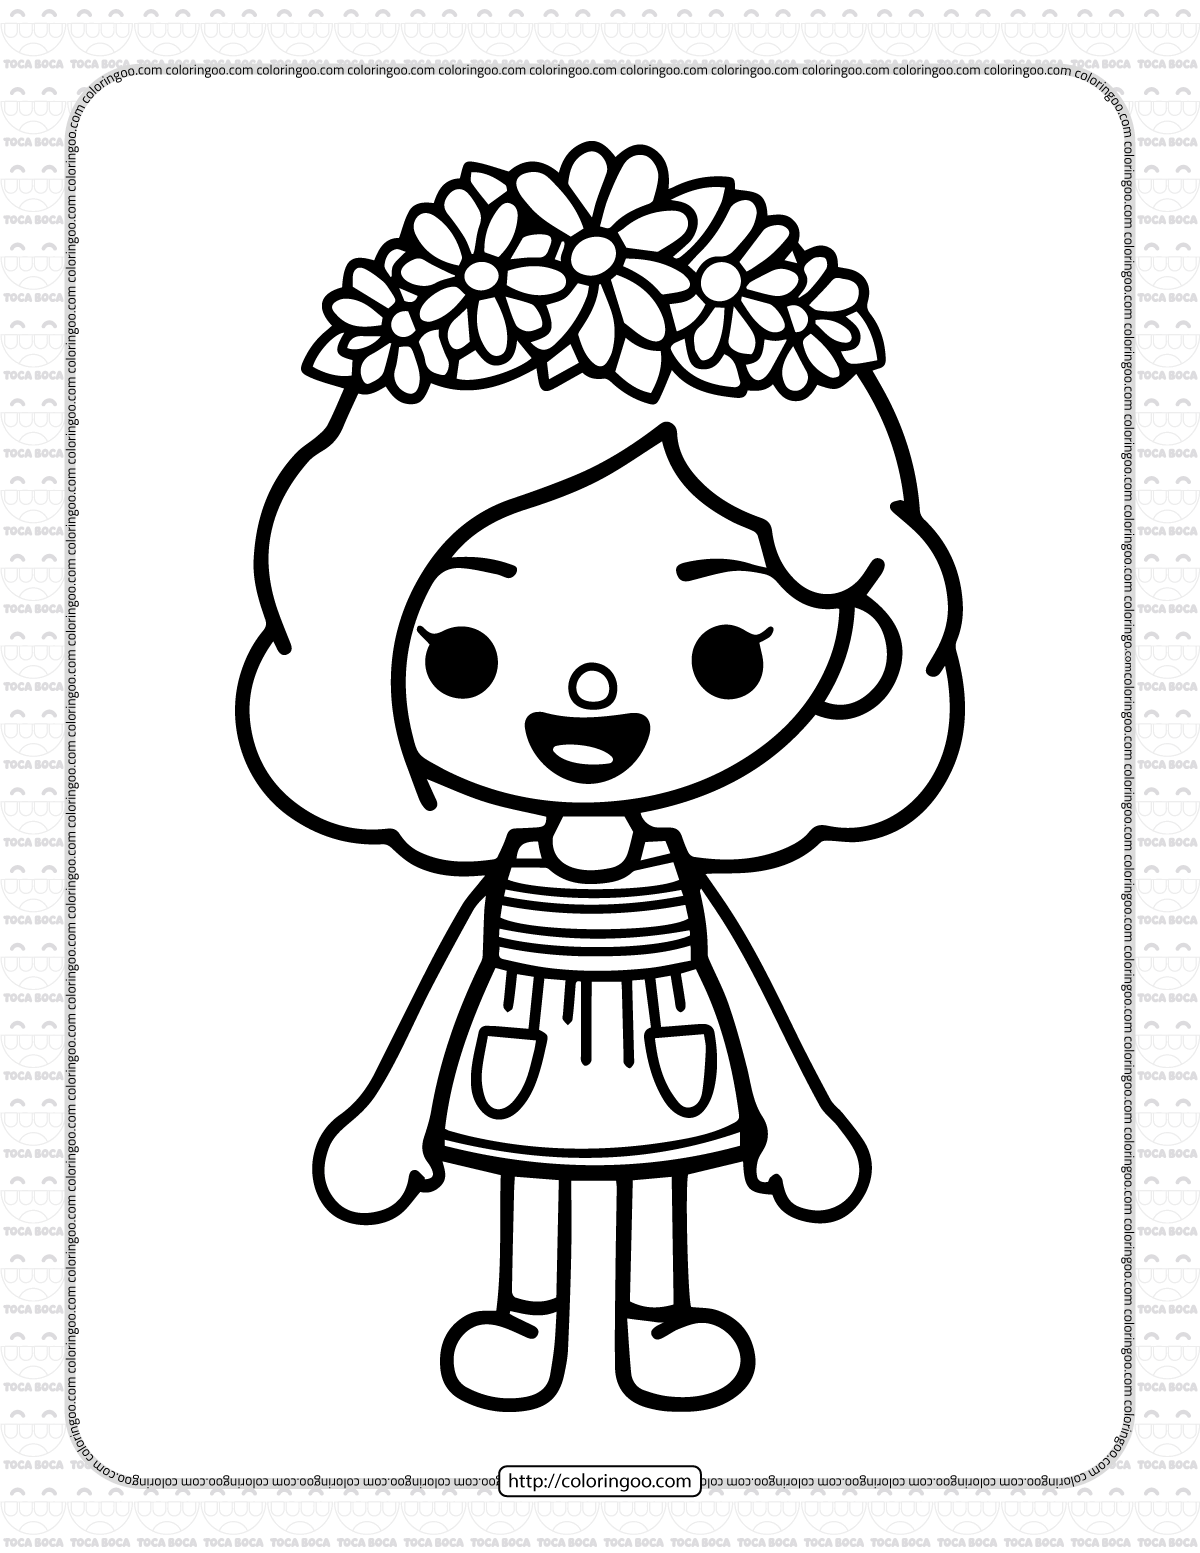 Toca life coloring pages coloring pages cartoon coloring pages cute coloring pages